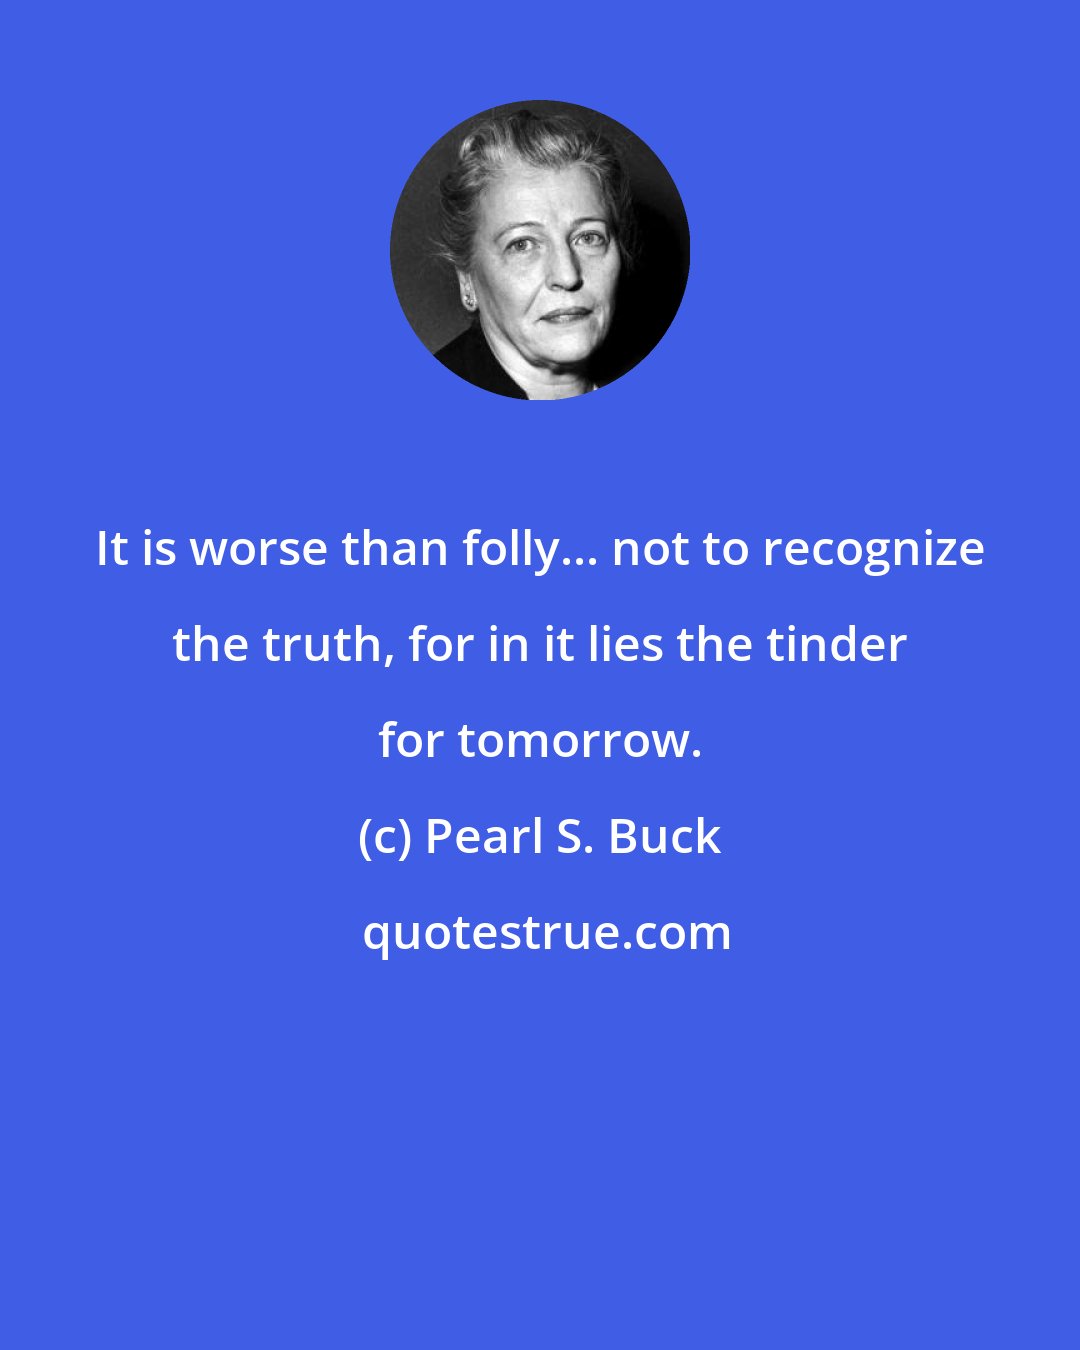 Pearl S. Buck: It is worse than folly... not to recognize the truth, for in it lies the tinder for tomorrow.